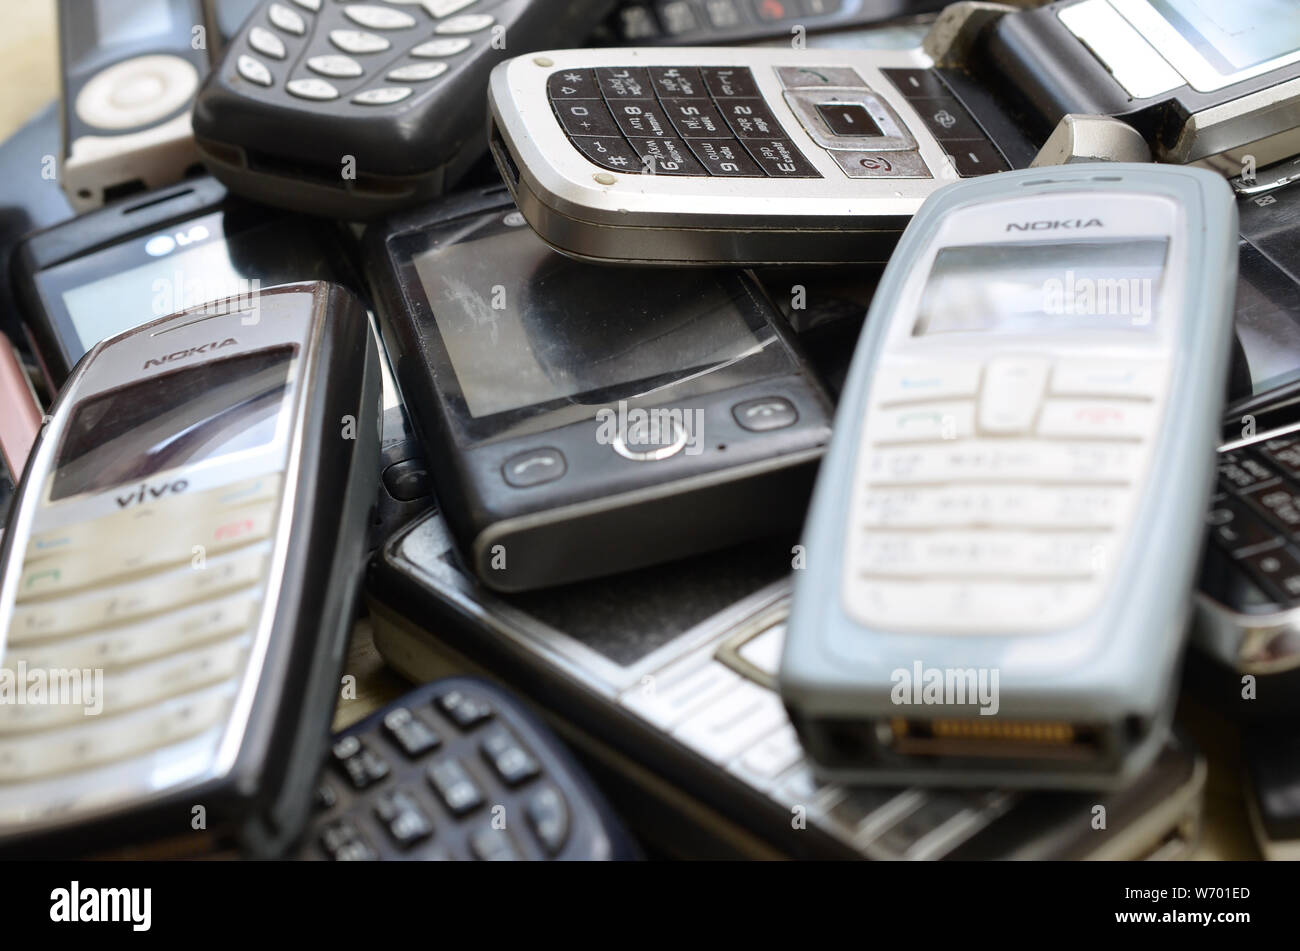 KHARKIV, UKRAINE - JULY 30, 2019: Bunch of old used outdated mobile phones. Recycling electronics of many brands was sold in the market cheap. Close u Stock Photo